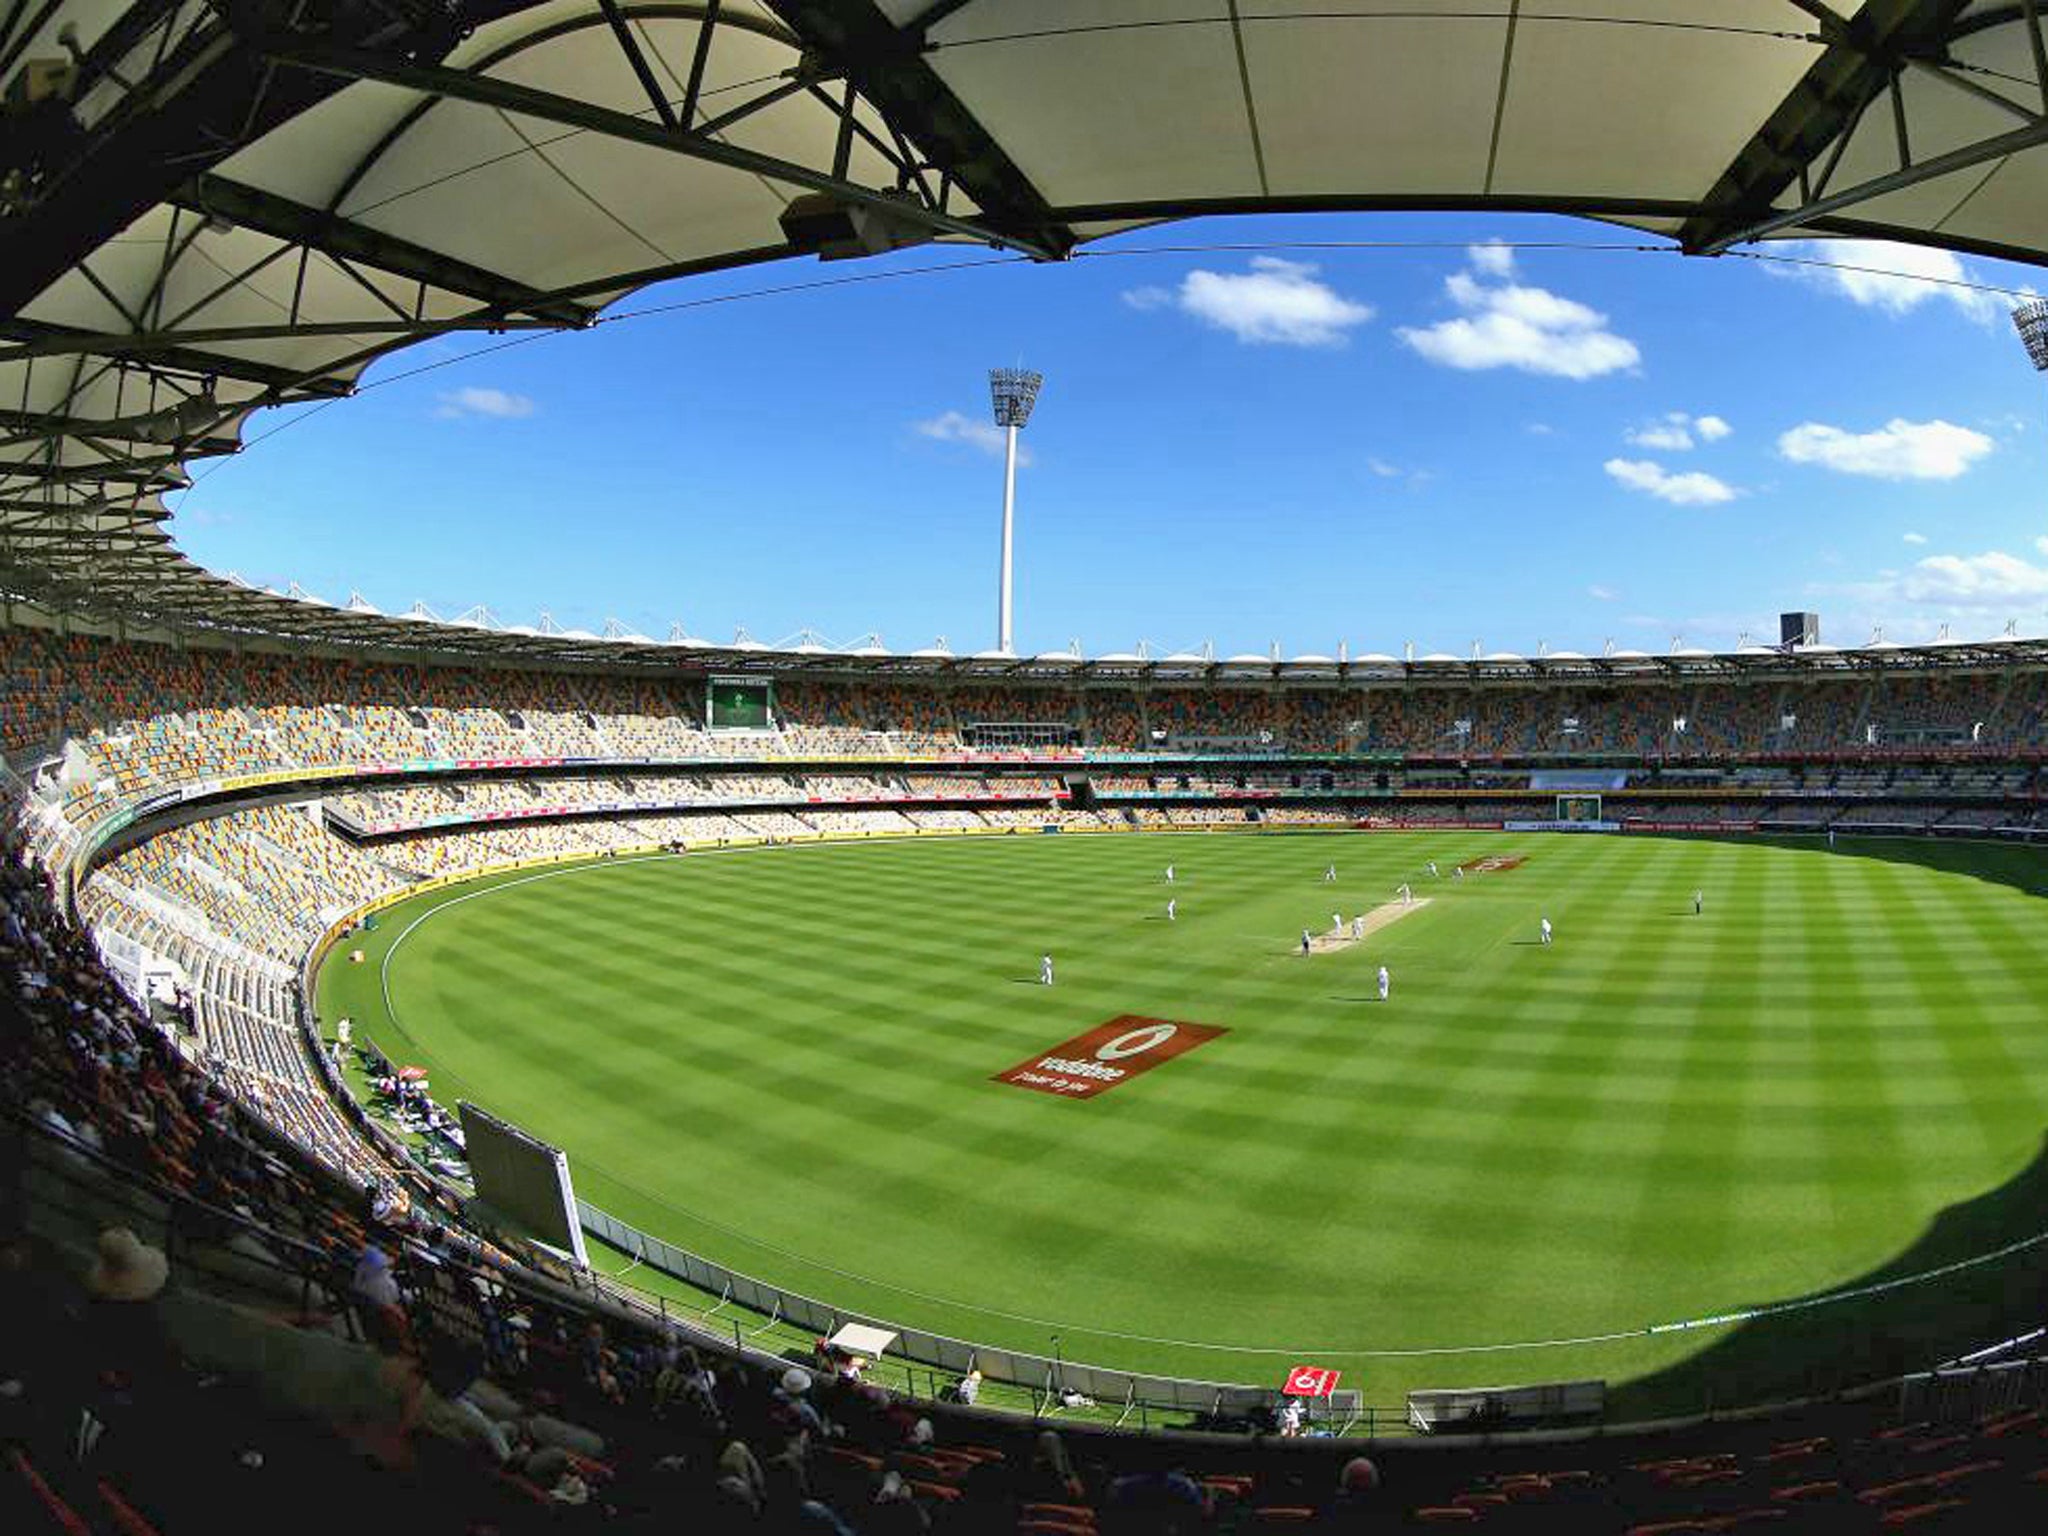 Knocked for six: the Gabba, Brisbane